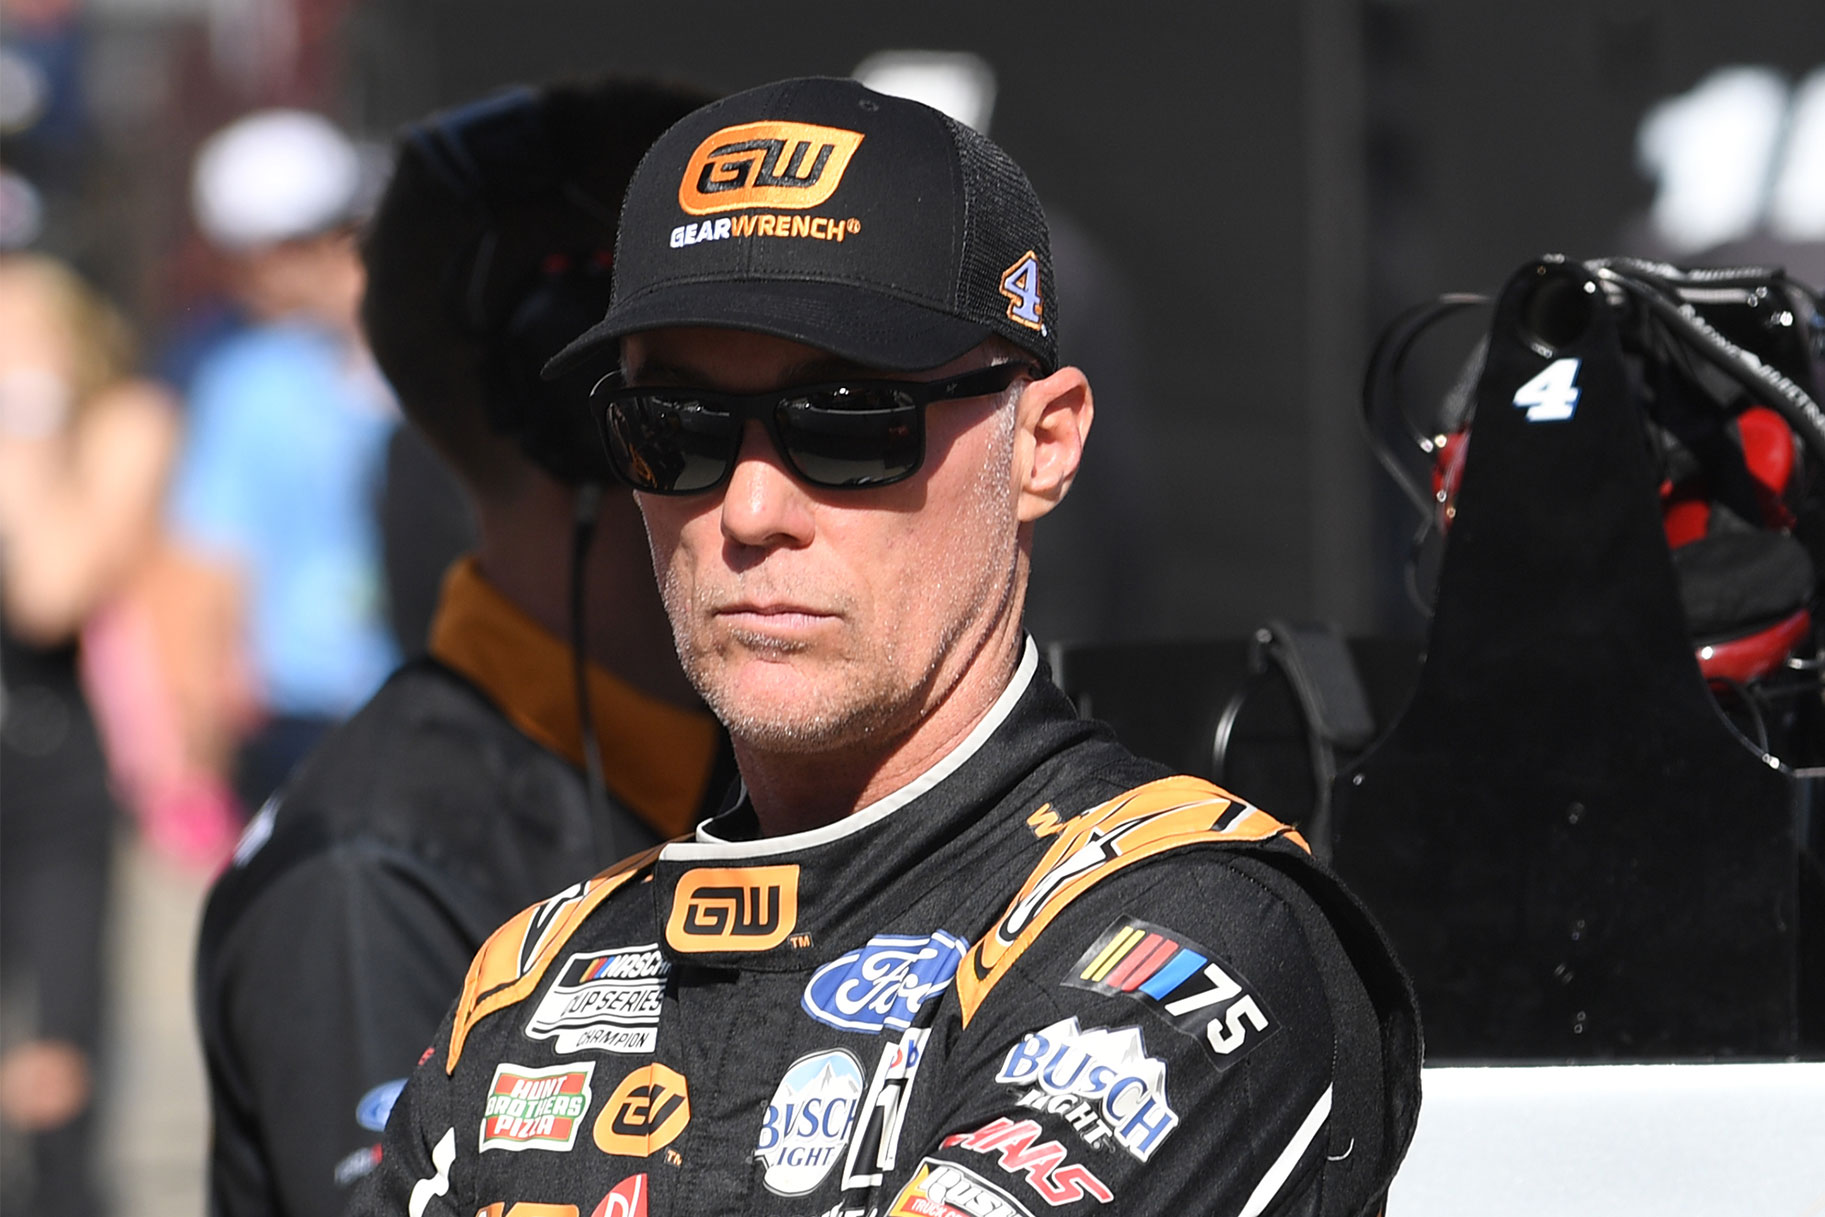 Harvick Steps in for Larson in Practice and Qualifying